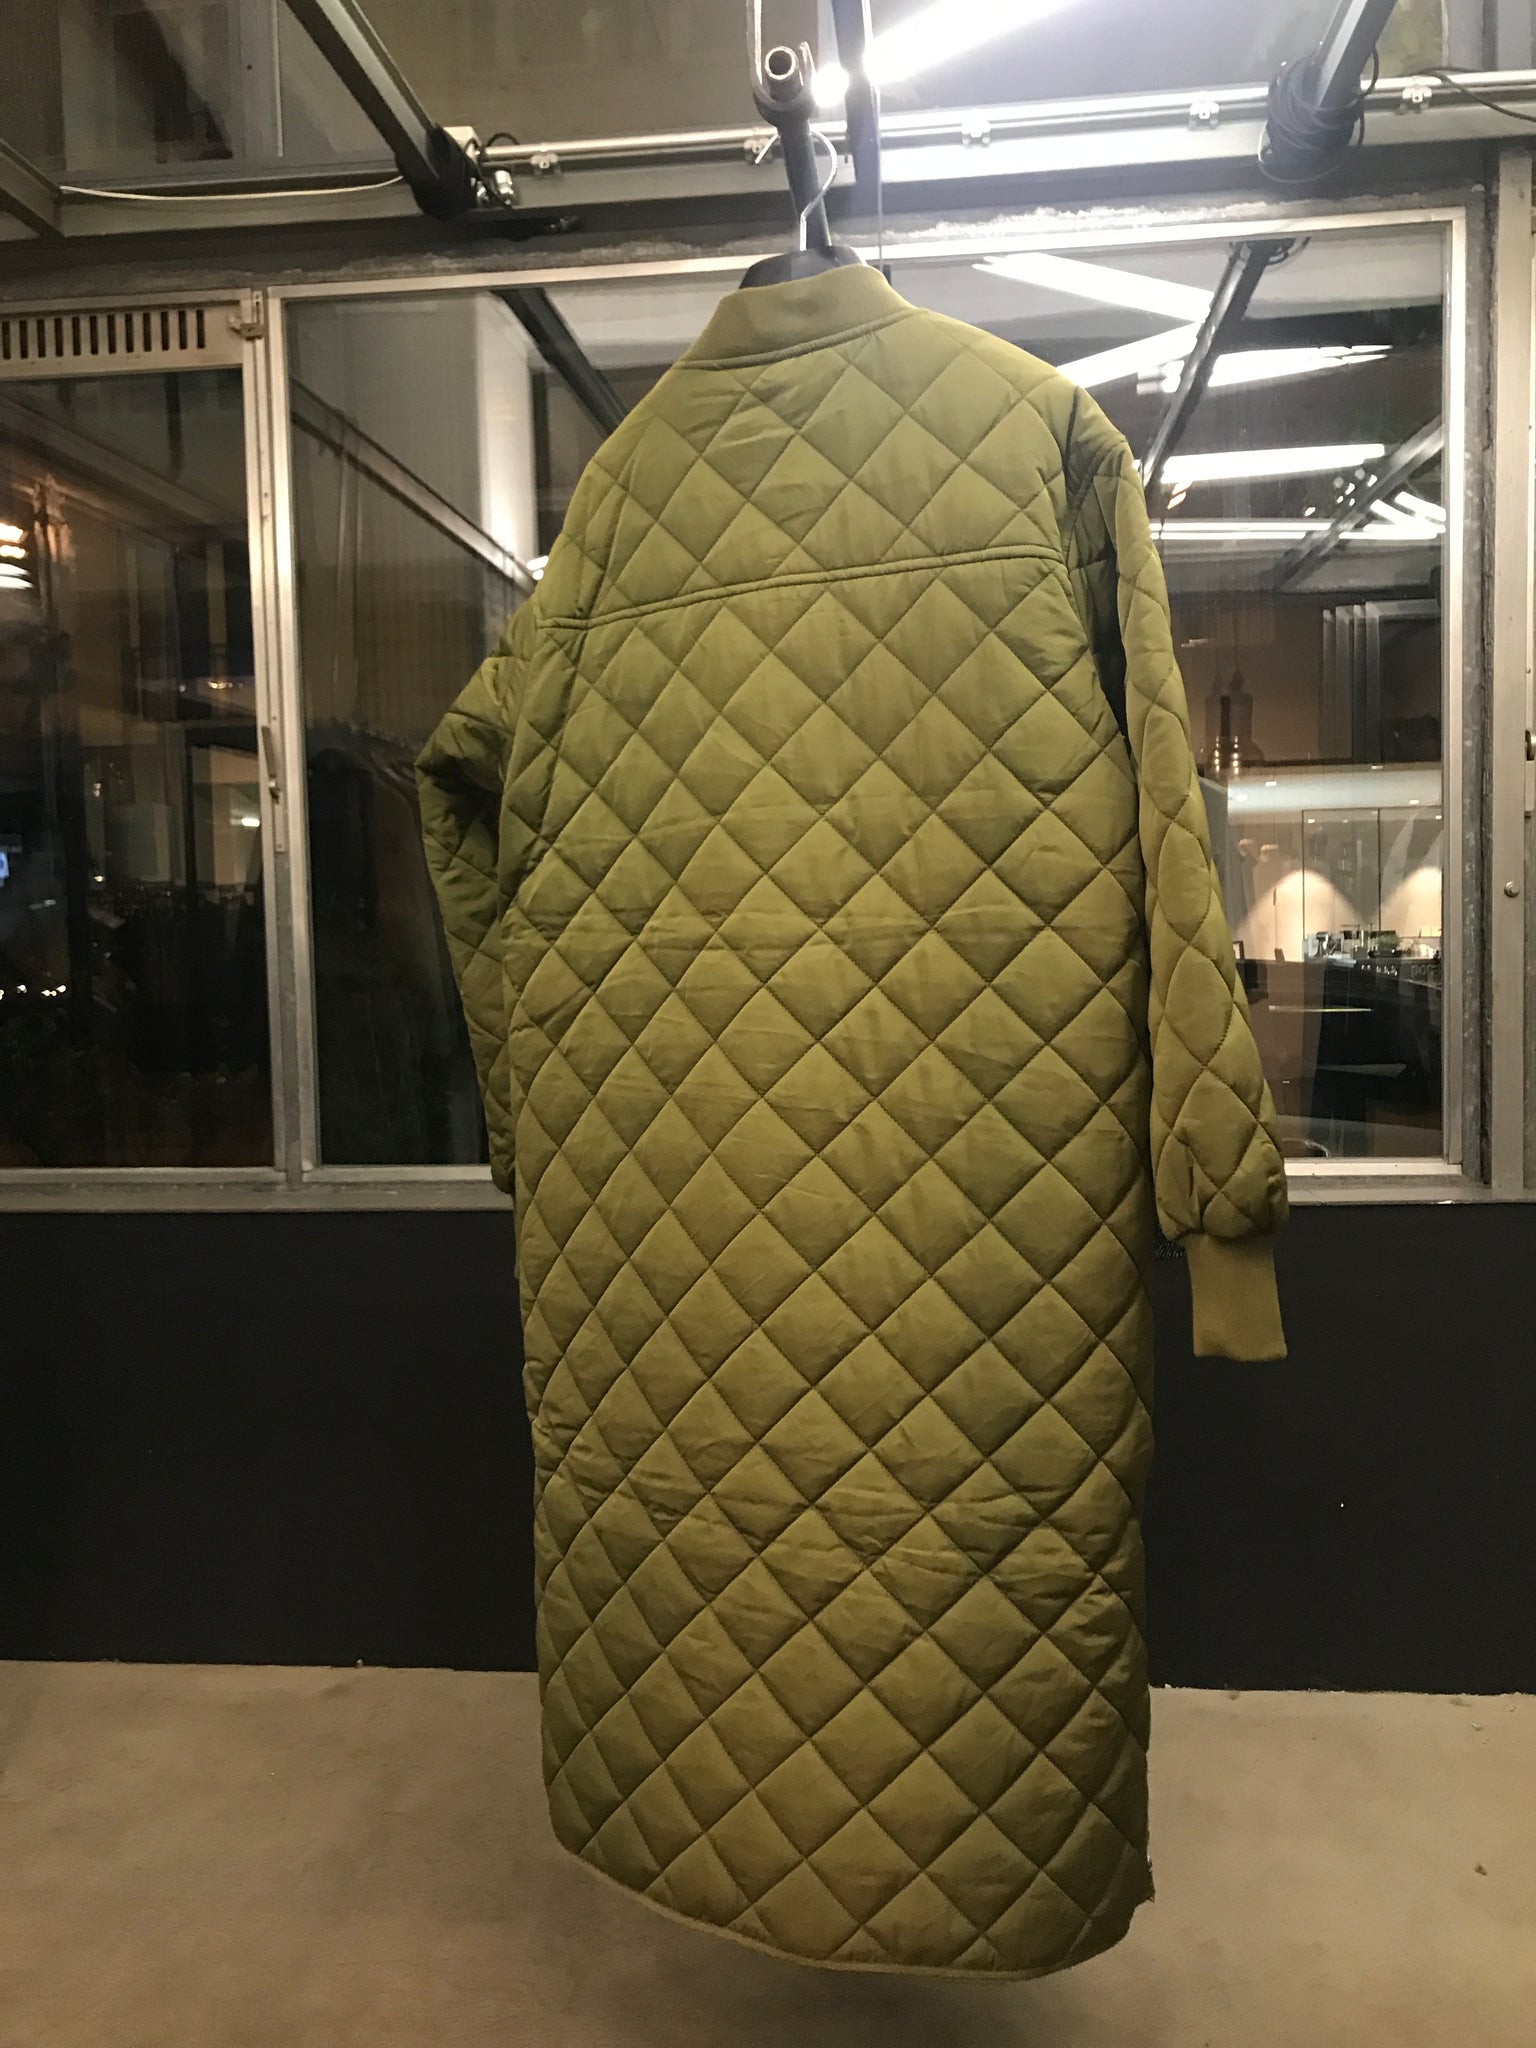 PADDED JACKET IN MOSS GREEN